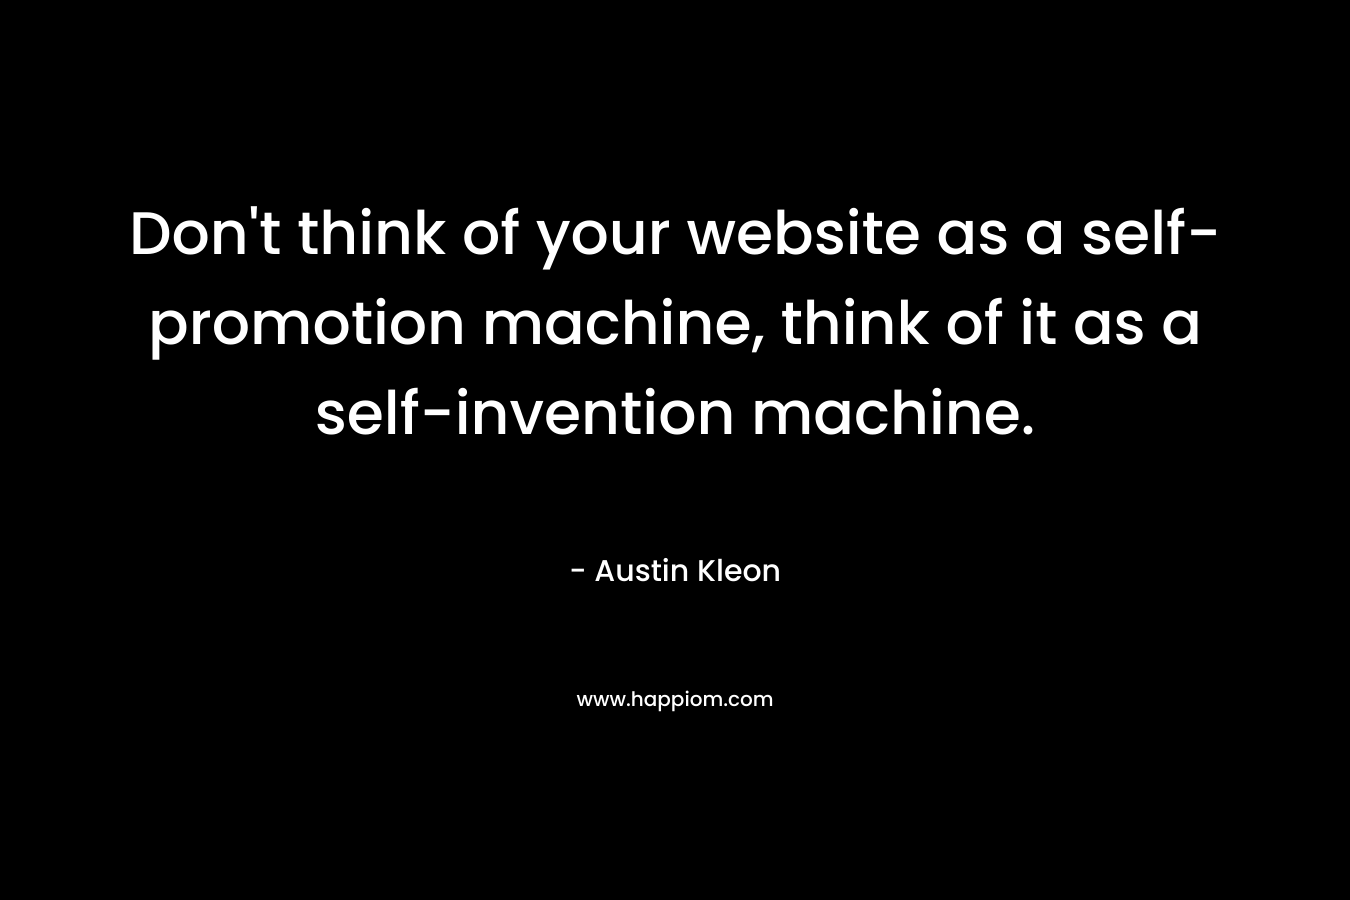 Don’t think of your website as a self-promotion machine, think of it as a self-invention machine. – Austin Kleon